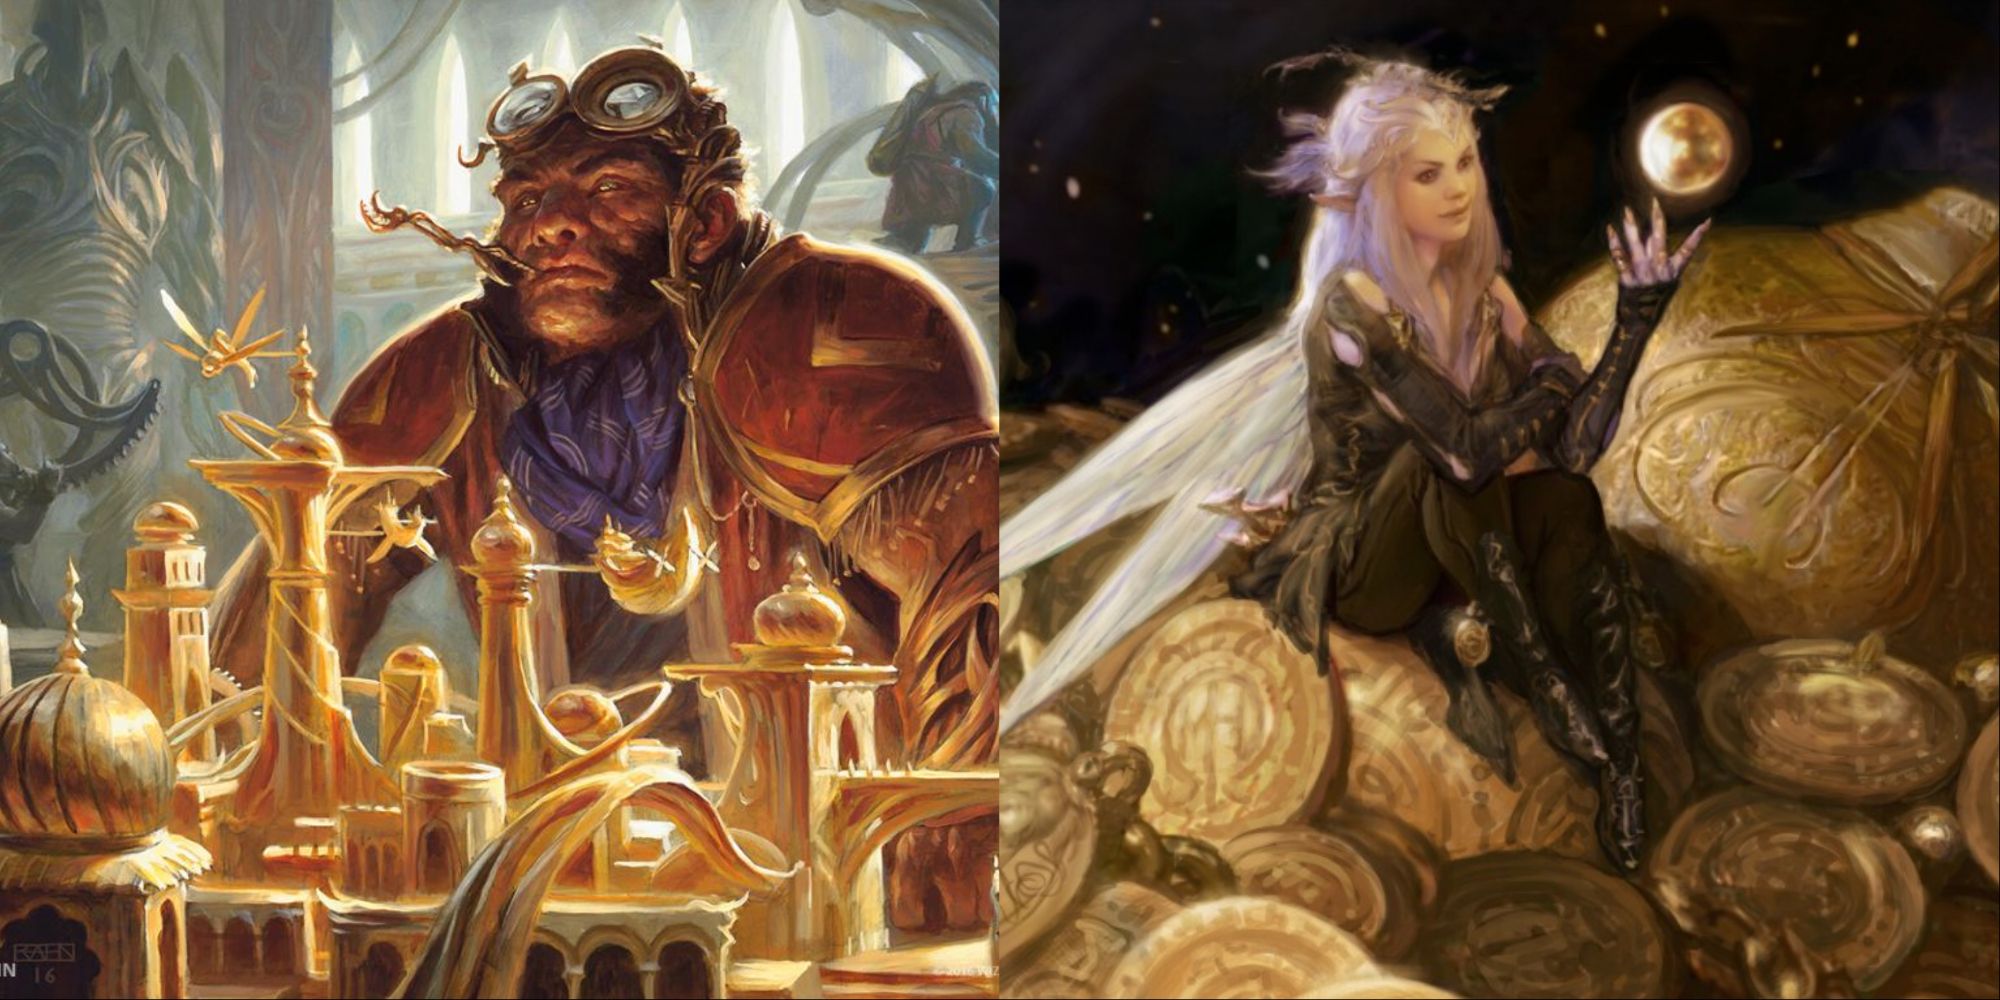 Sram, Senior Adificer and All That Glitters artwork in Magic: The Gathering.